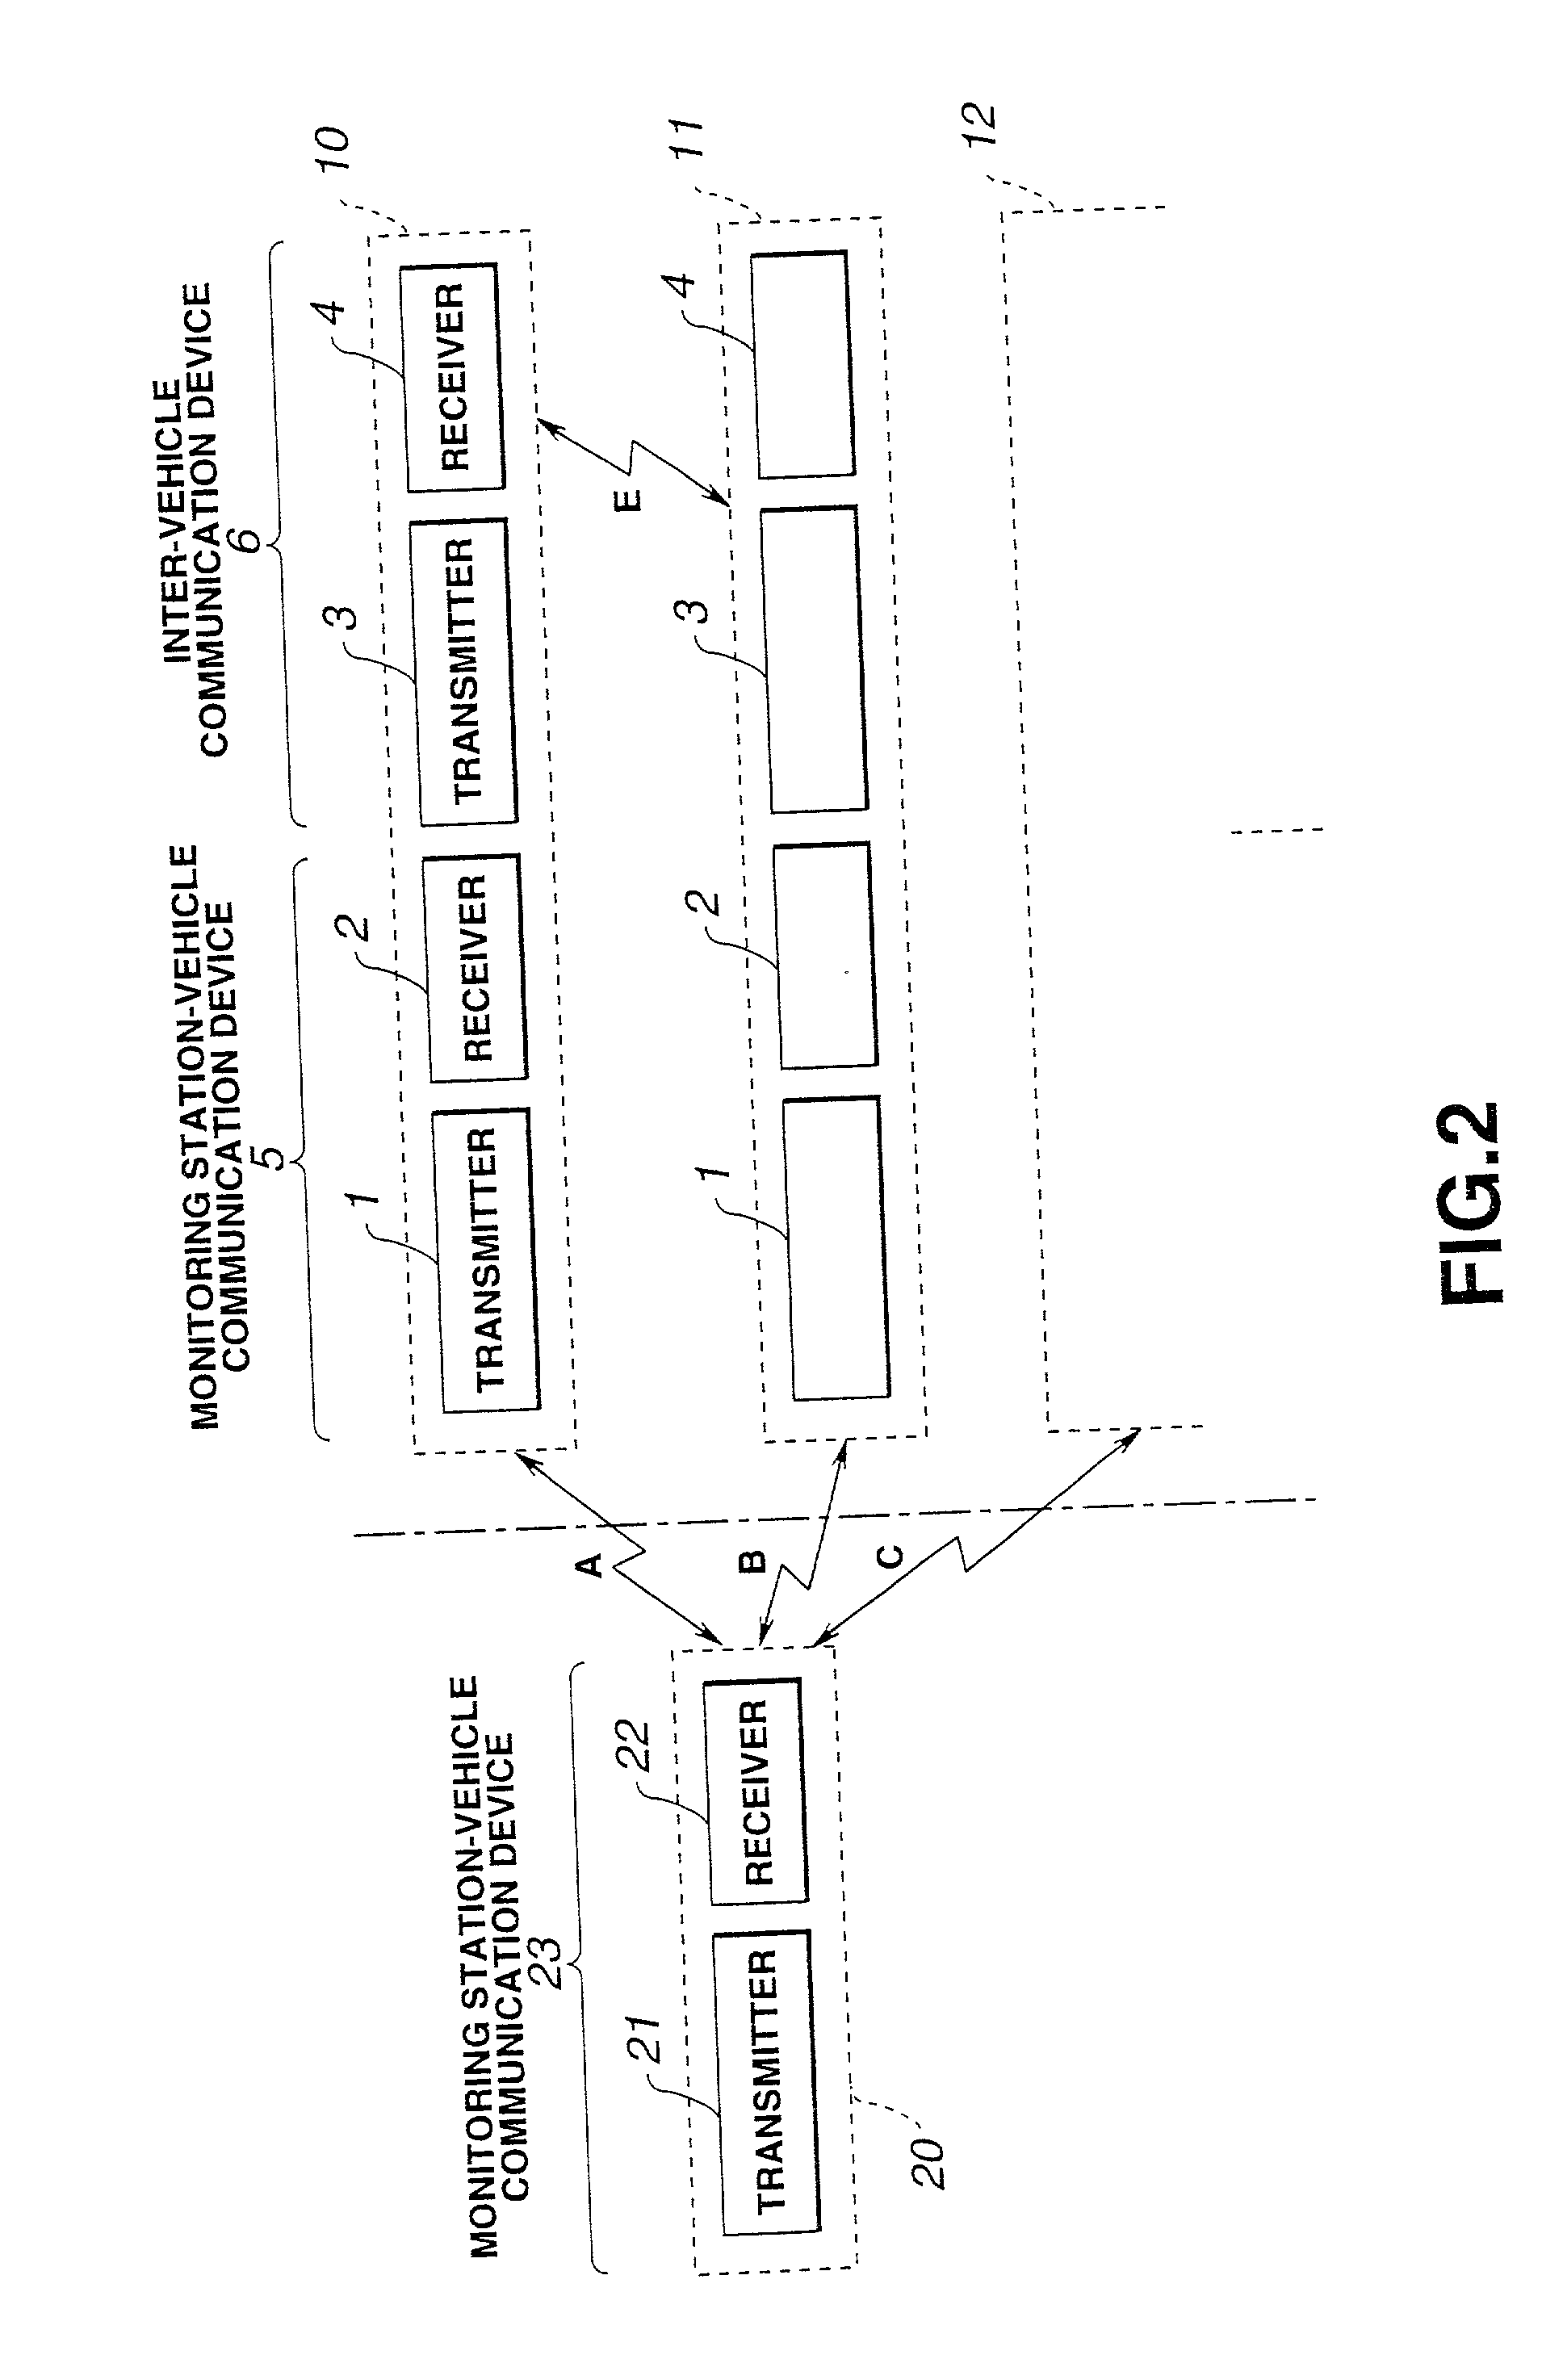 Vehicle interference prevention device